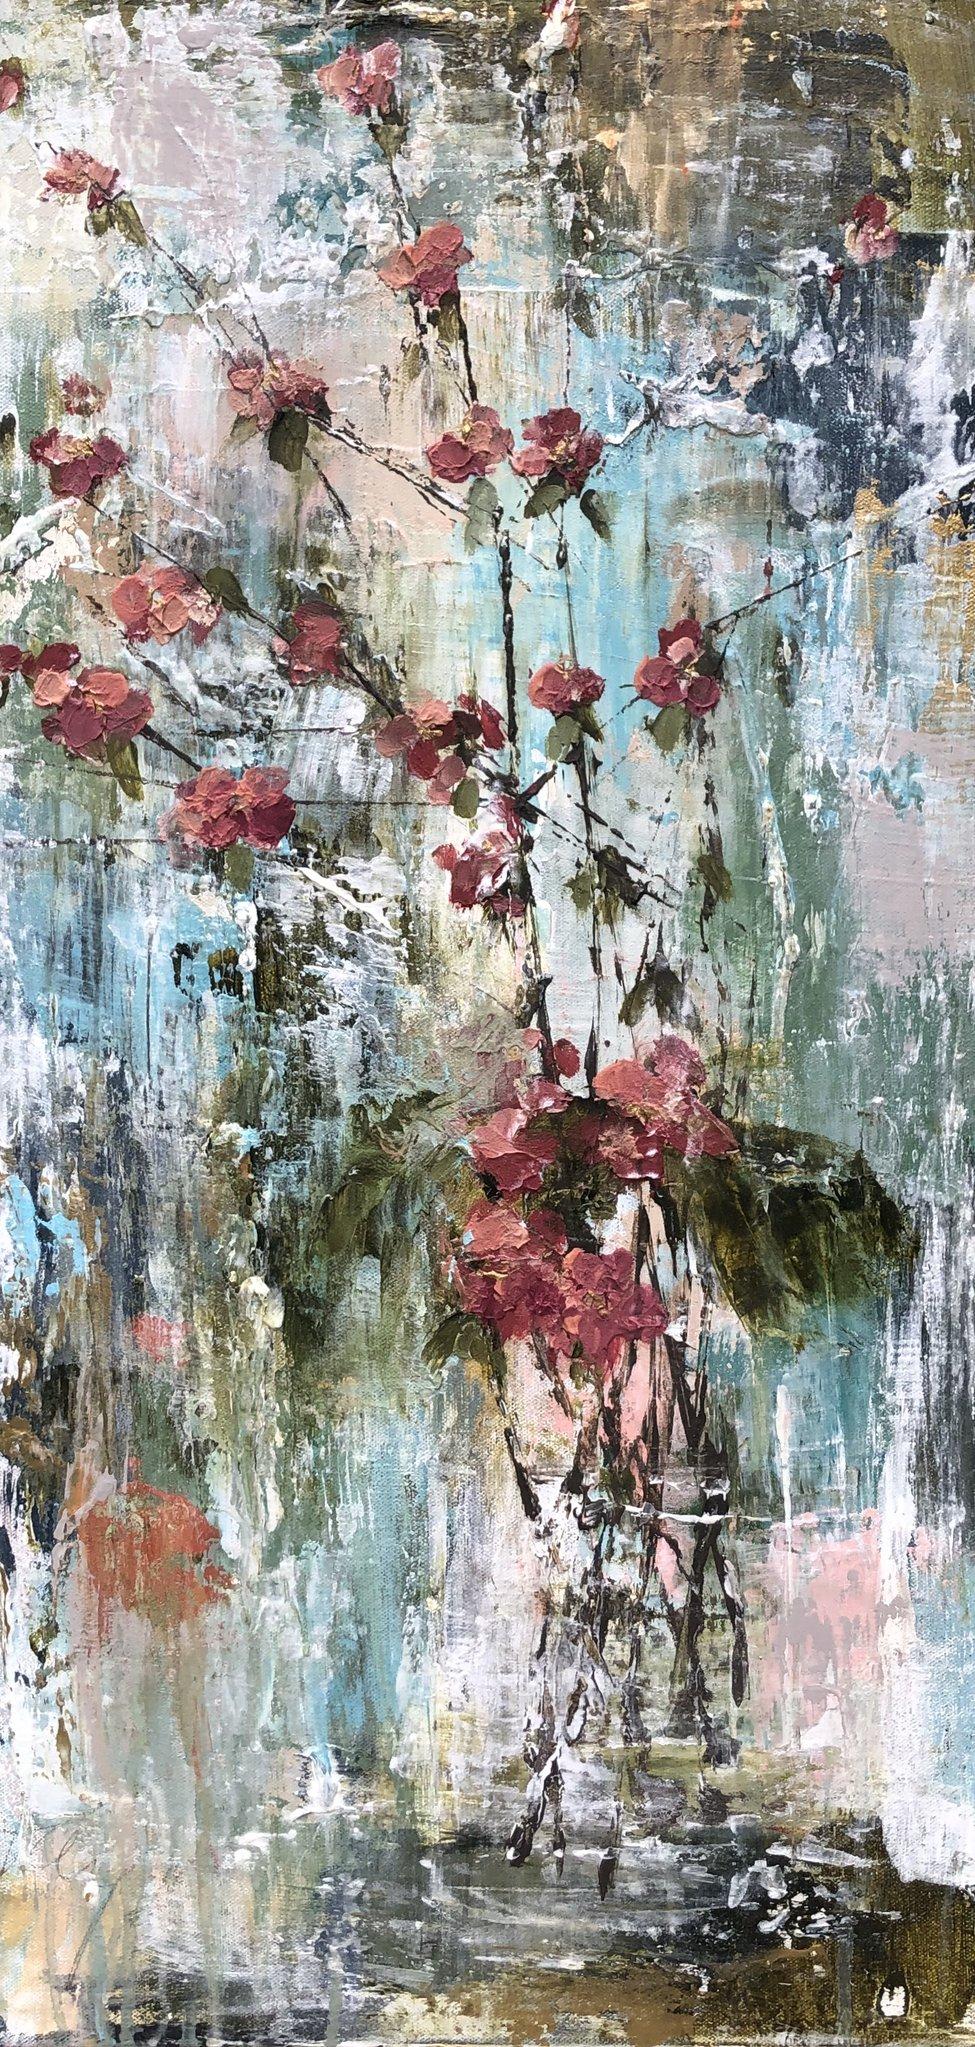 'Fuchsia Quince' is a medium size mixed media on canvas abstract floral painting of vertical format, created by American artist Melissa Payne Baker in 2020. Featuring a soft palette mostly made of blue, green, pink, and grey playing beautifully with